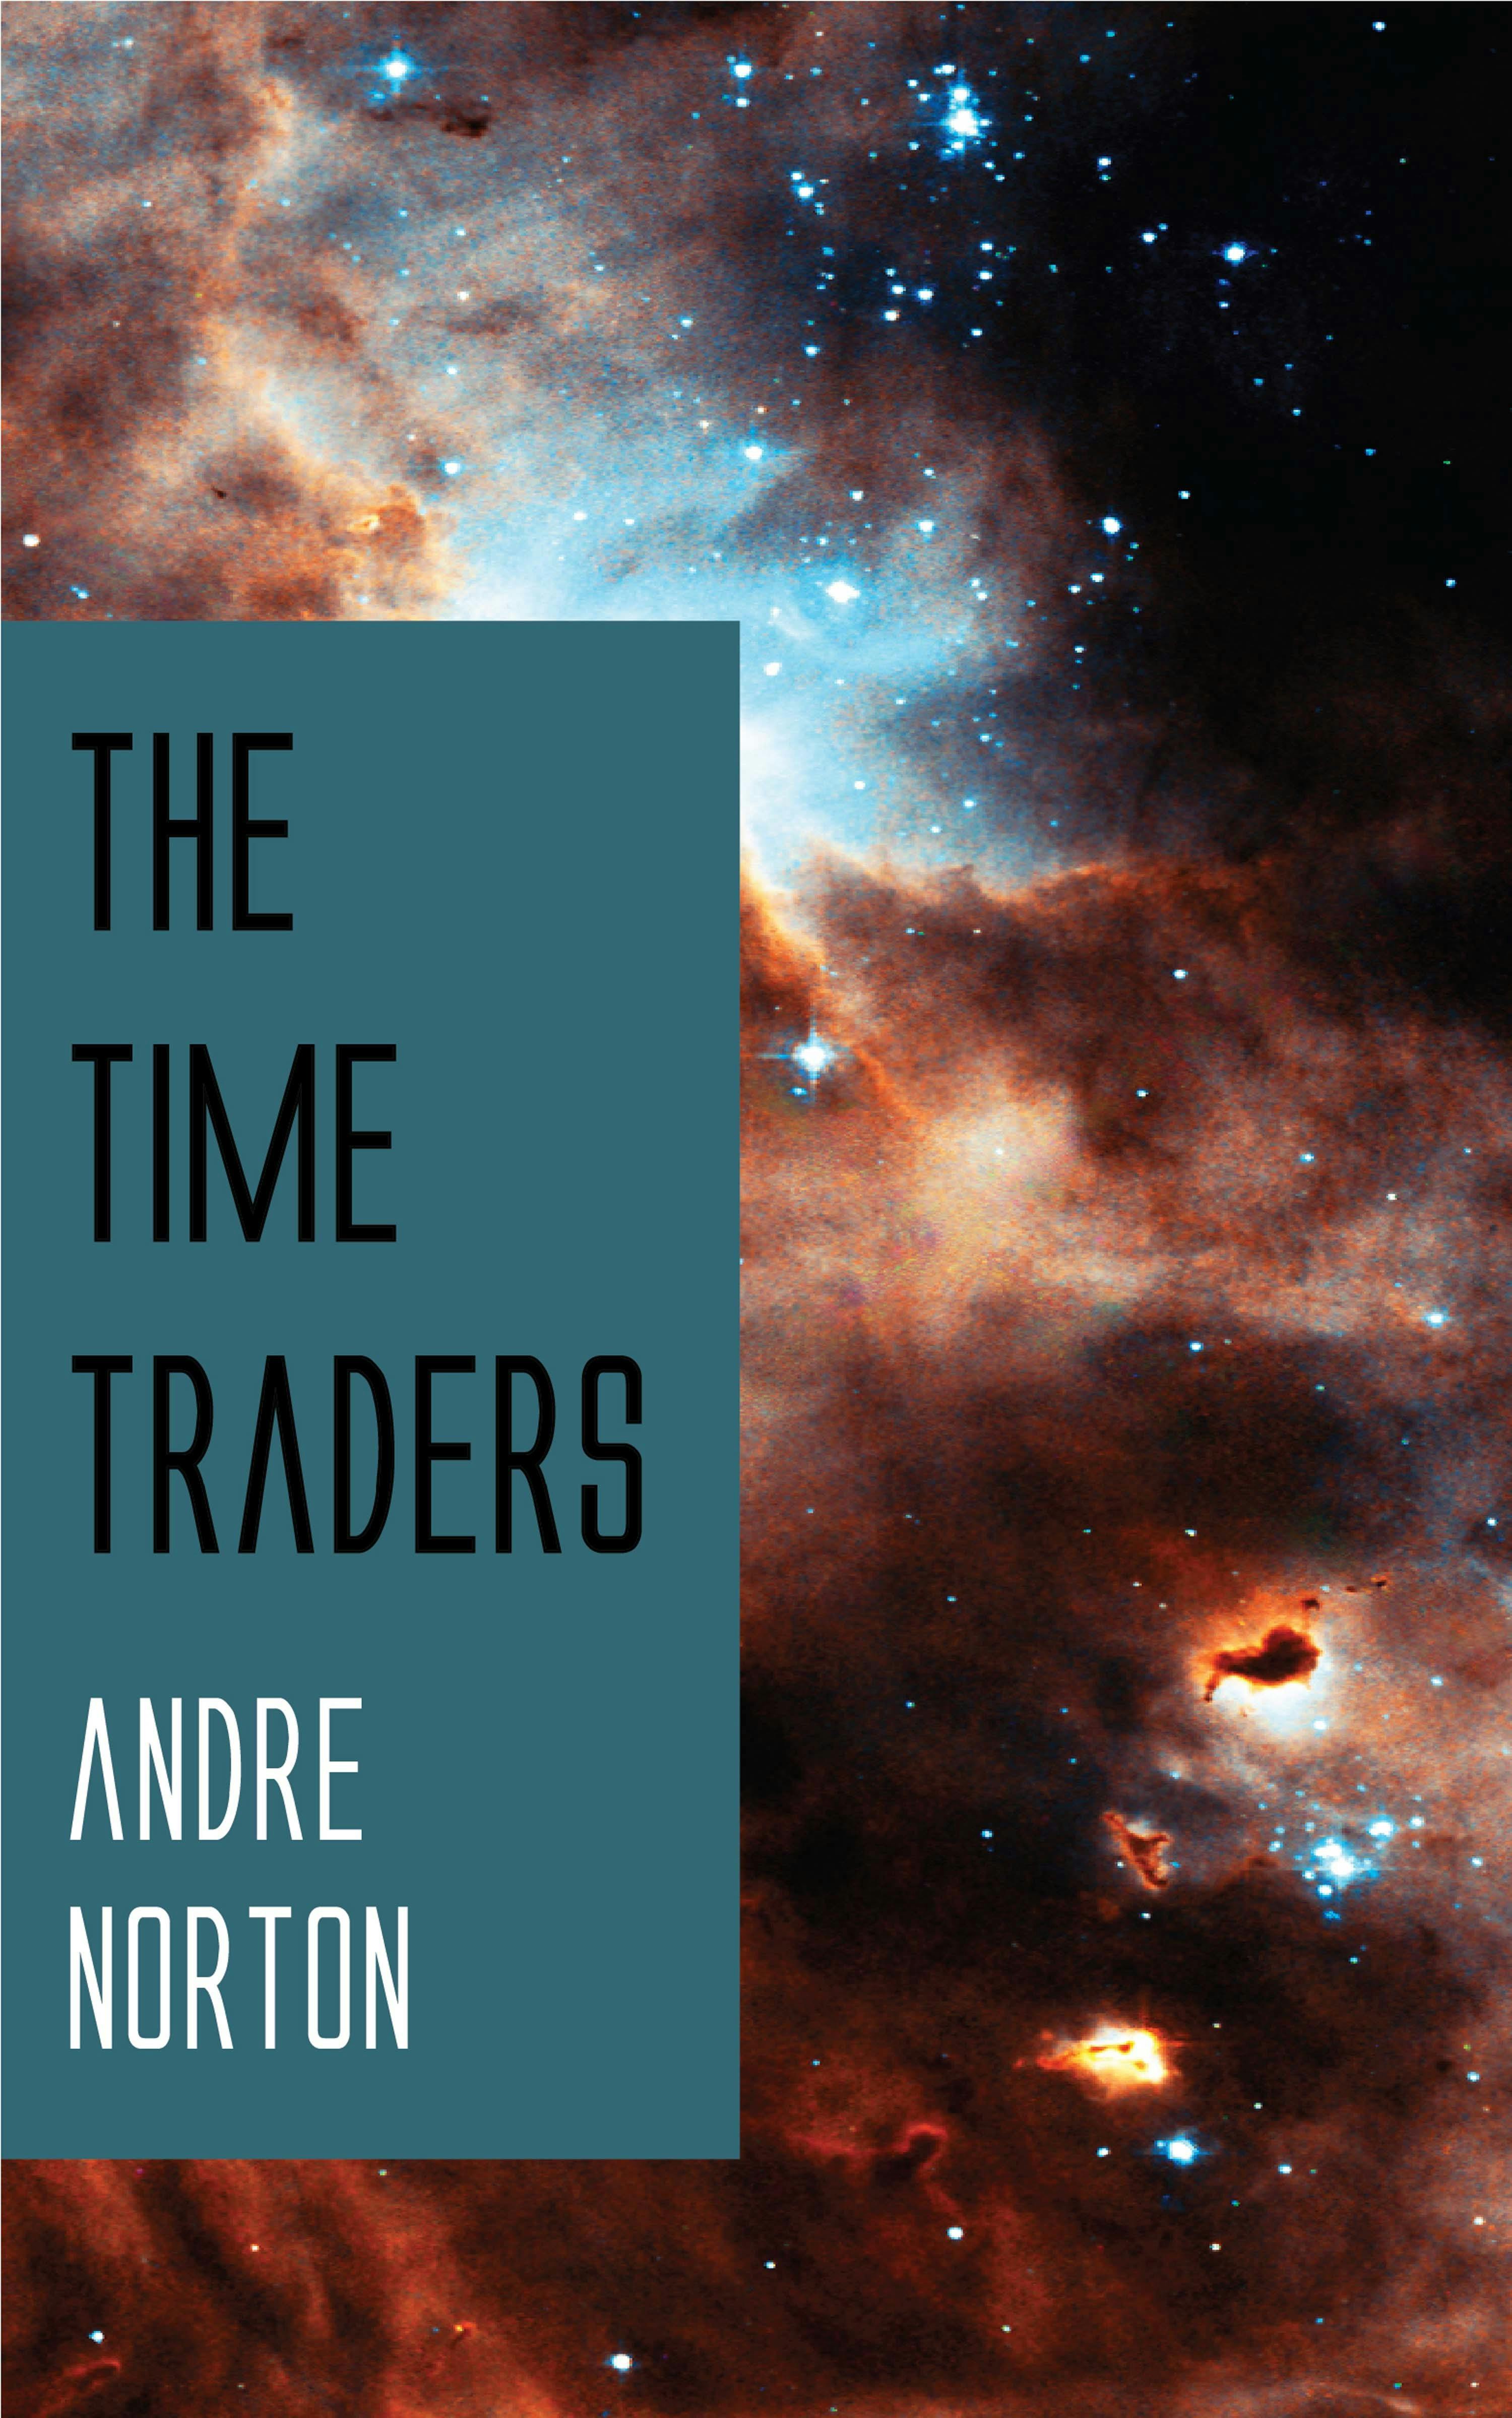 The Time Traders - Andre Norton